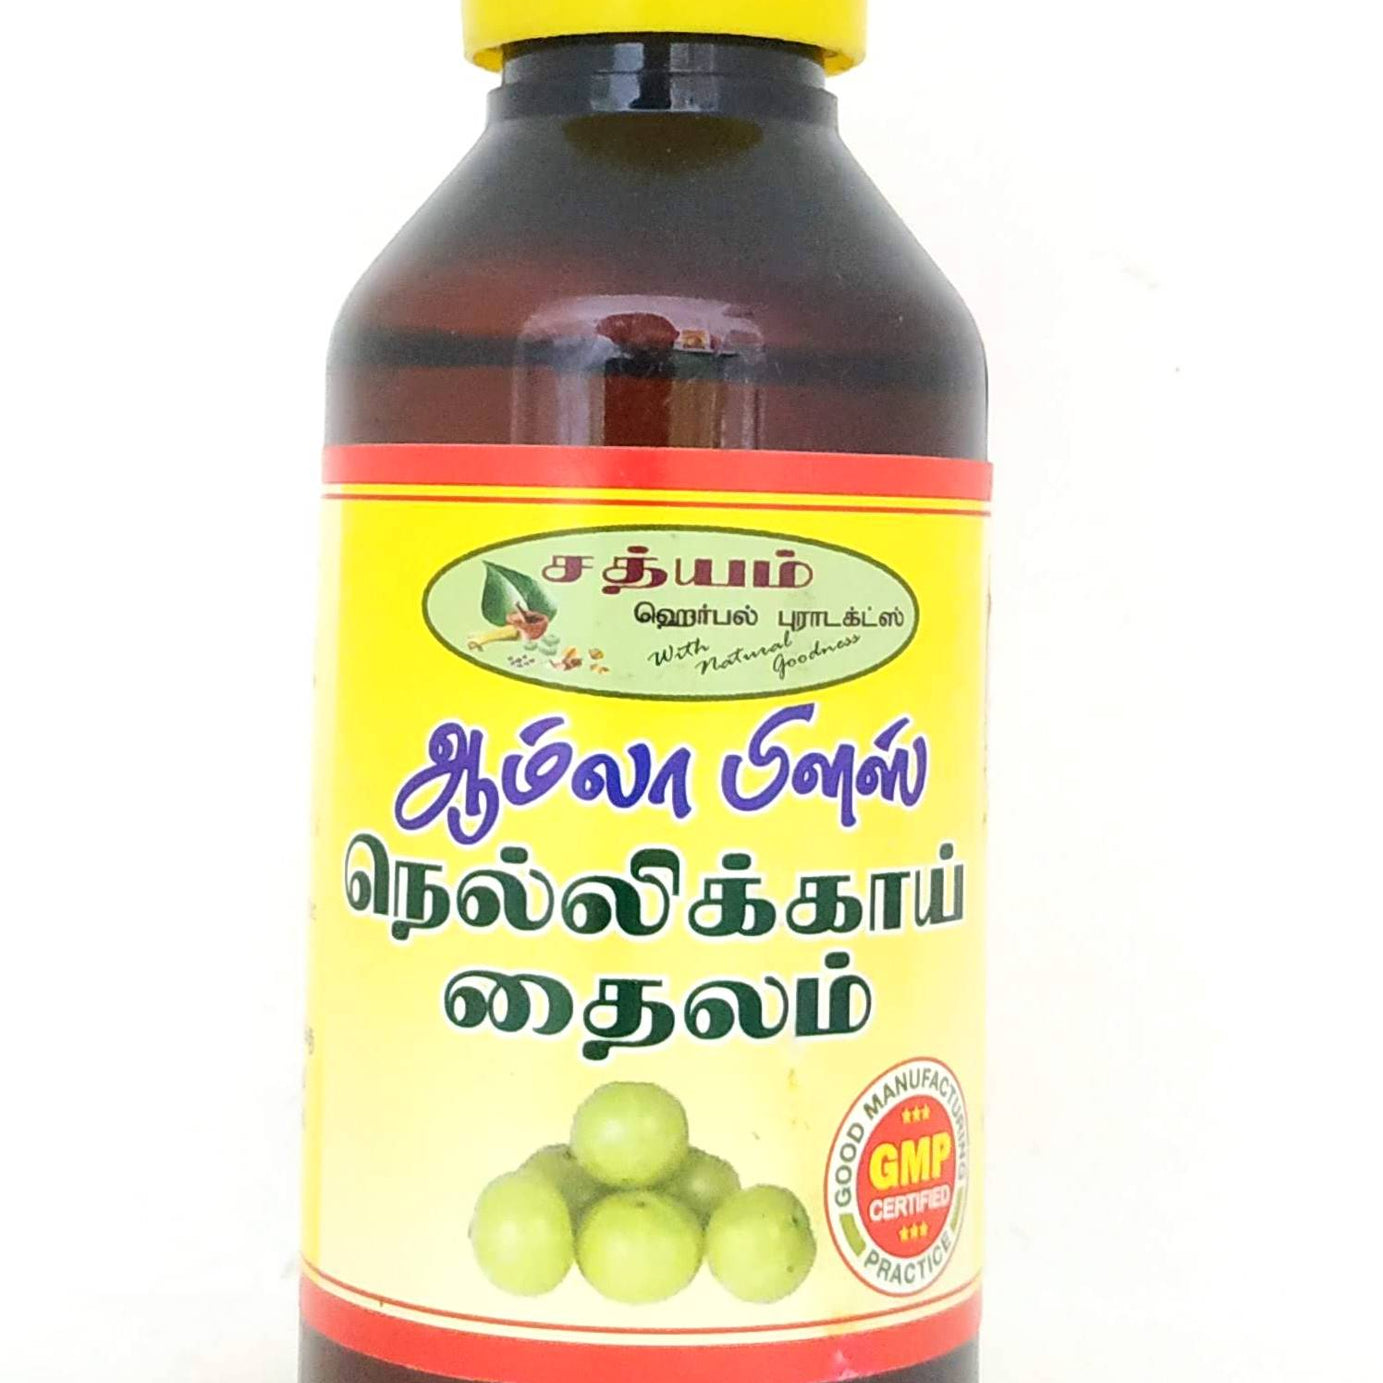 Shop Nellikai thailam 100ml at price 120.00 from Sathyam Herbals Online - Ayush Care